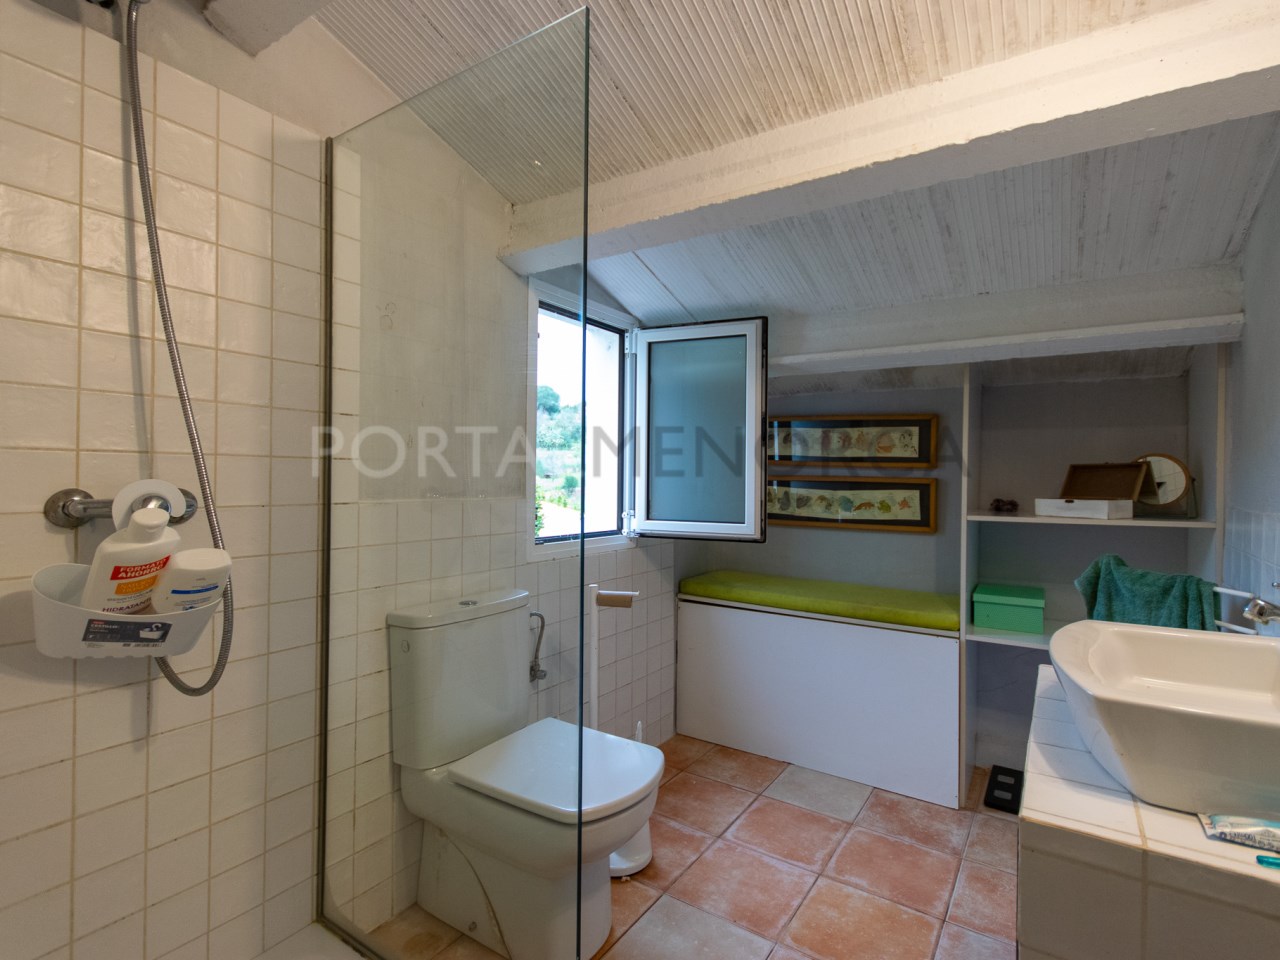 Charming house bathroom with grounds and views of the village of Ferreries